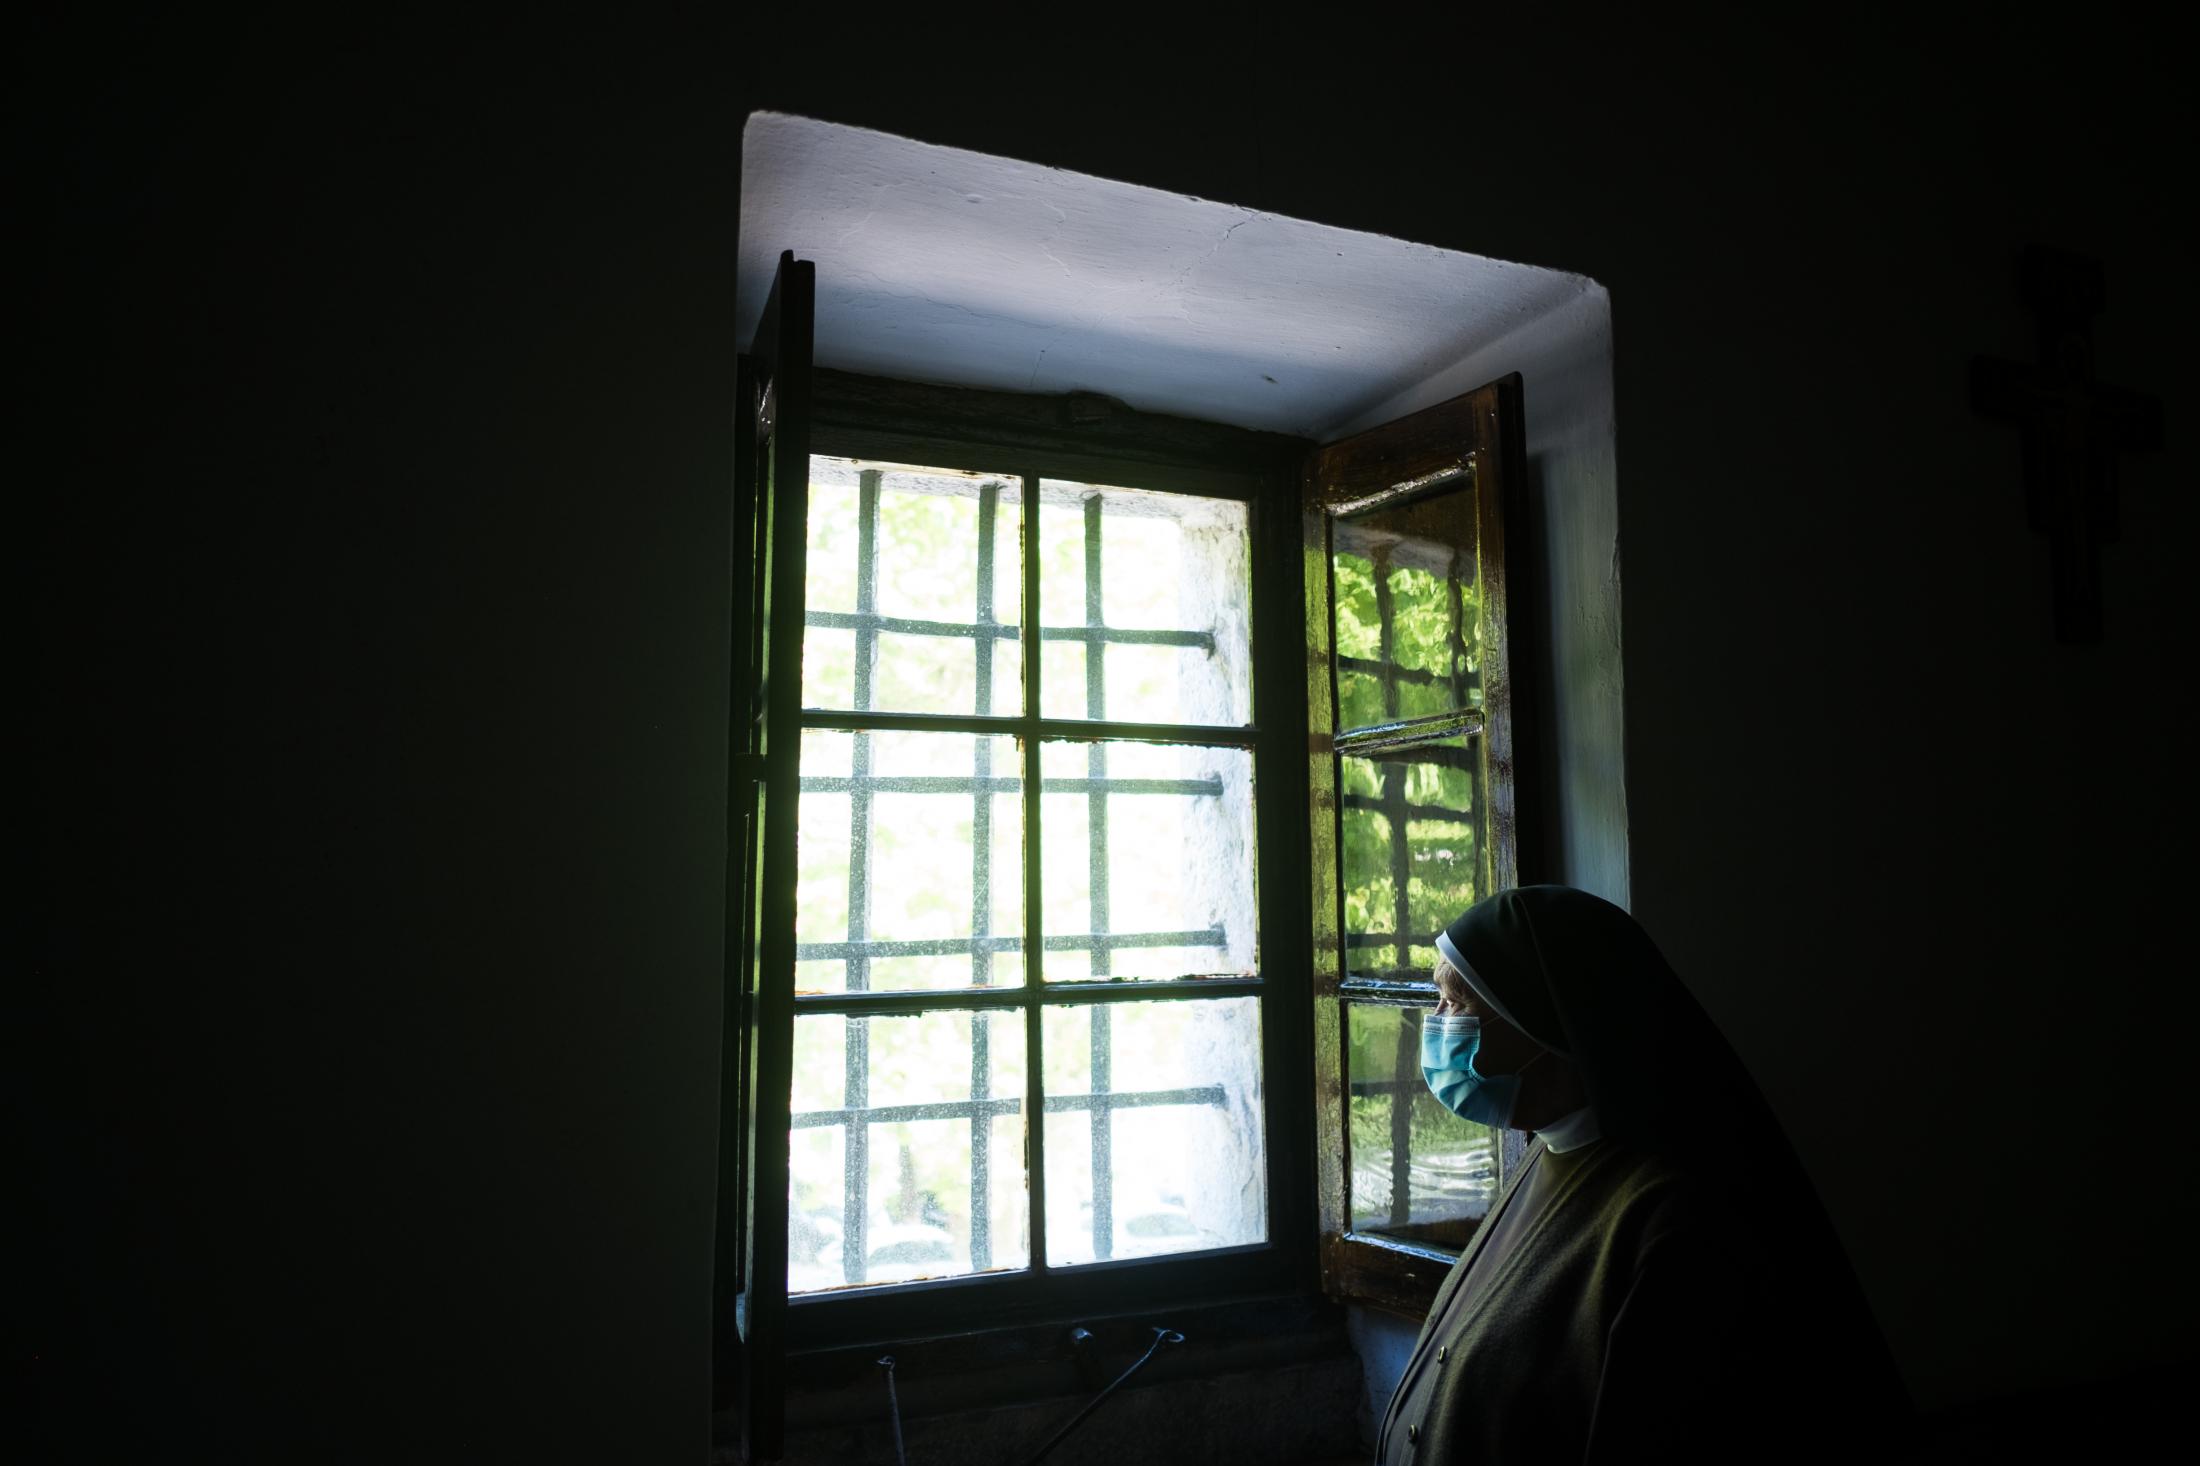 AN OASIS INSIDE THE PANDEMIC -   Sister Genoveva looks out the window of the monastery....